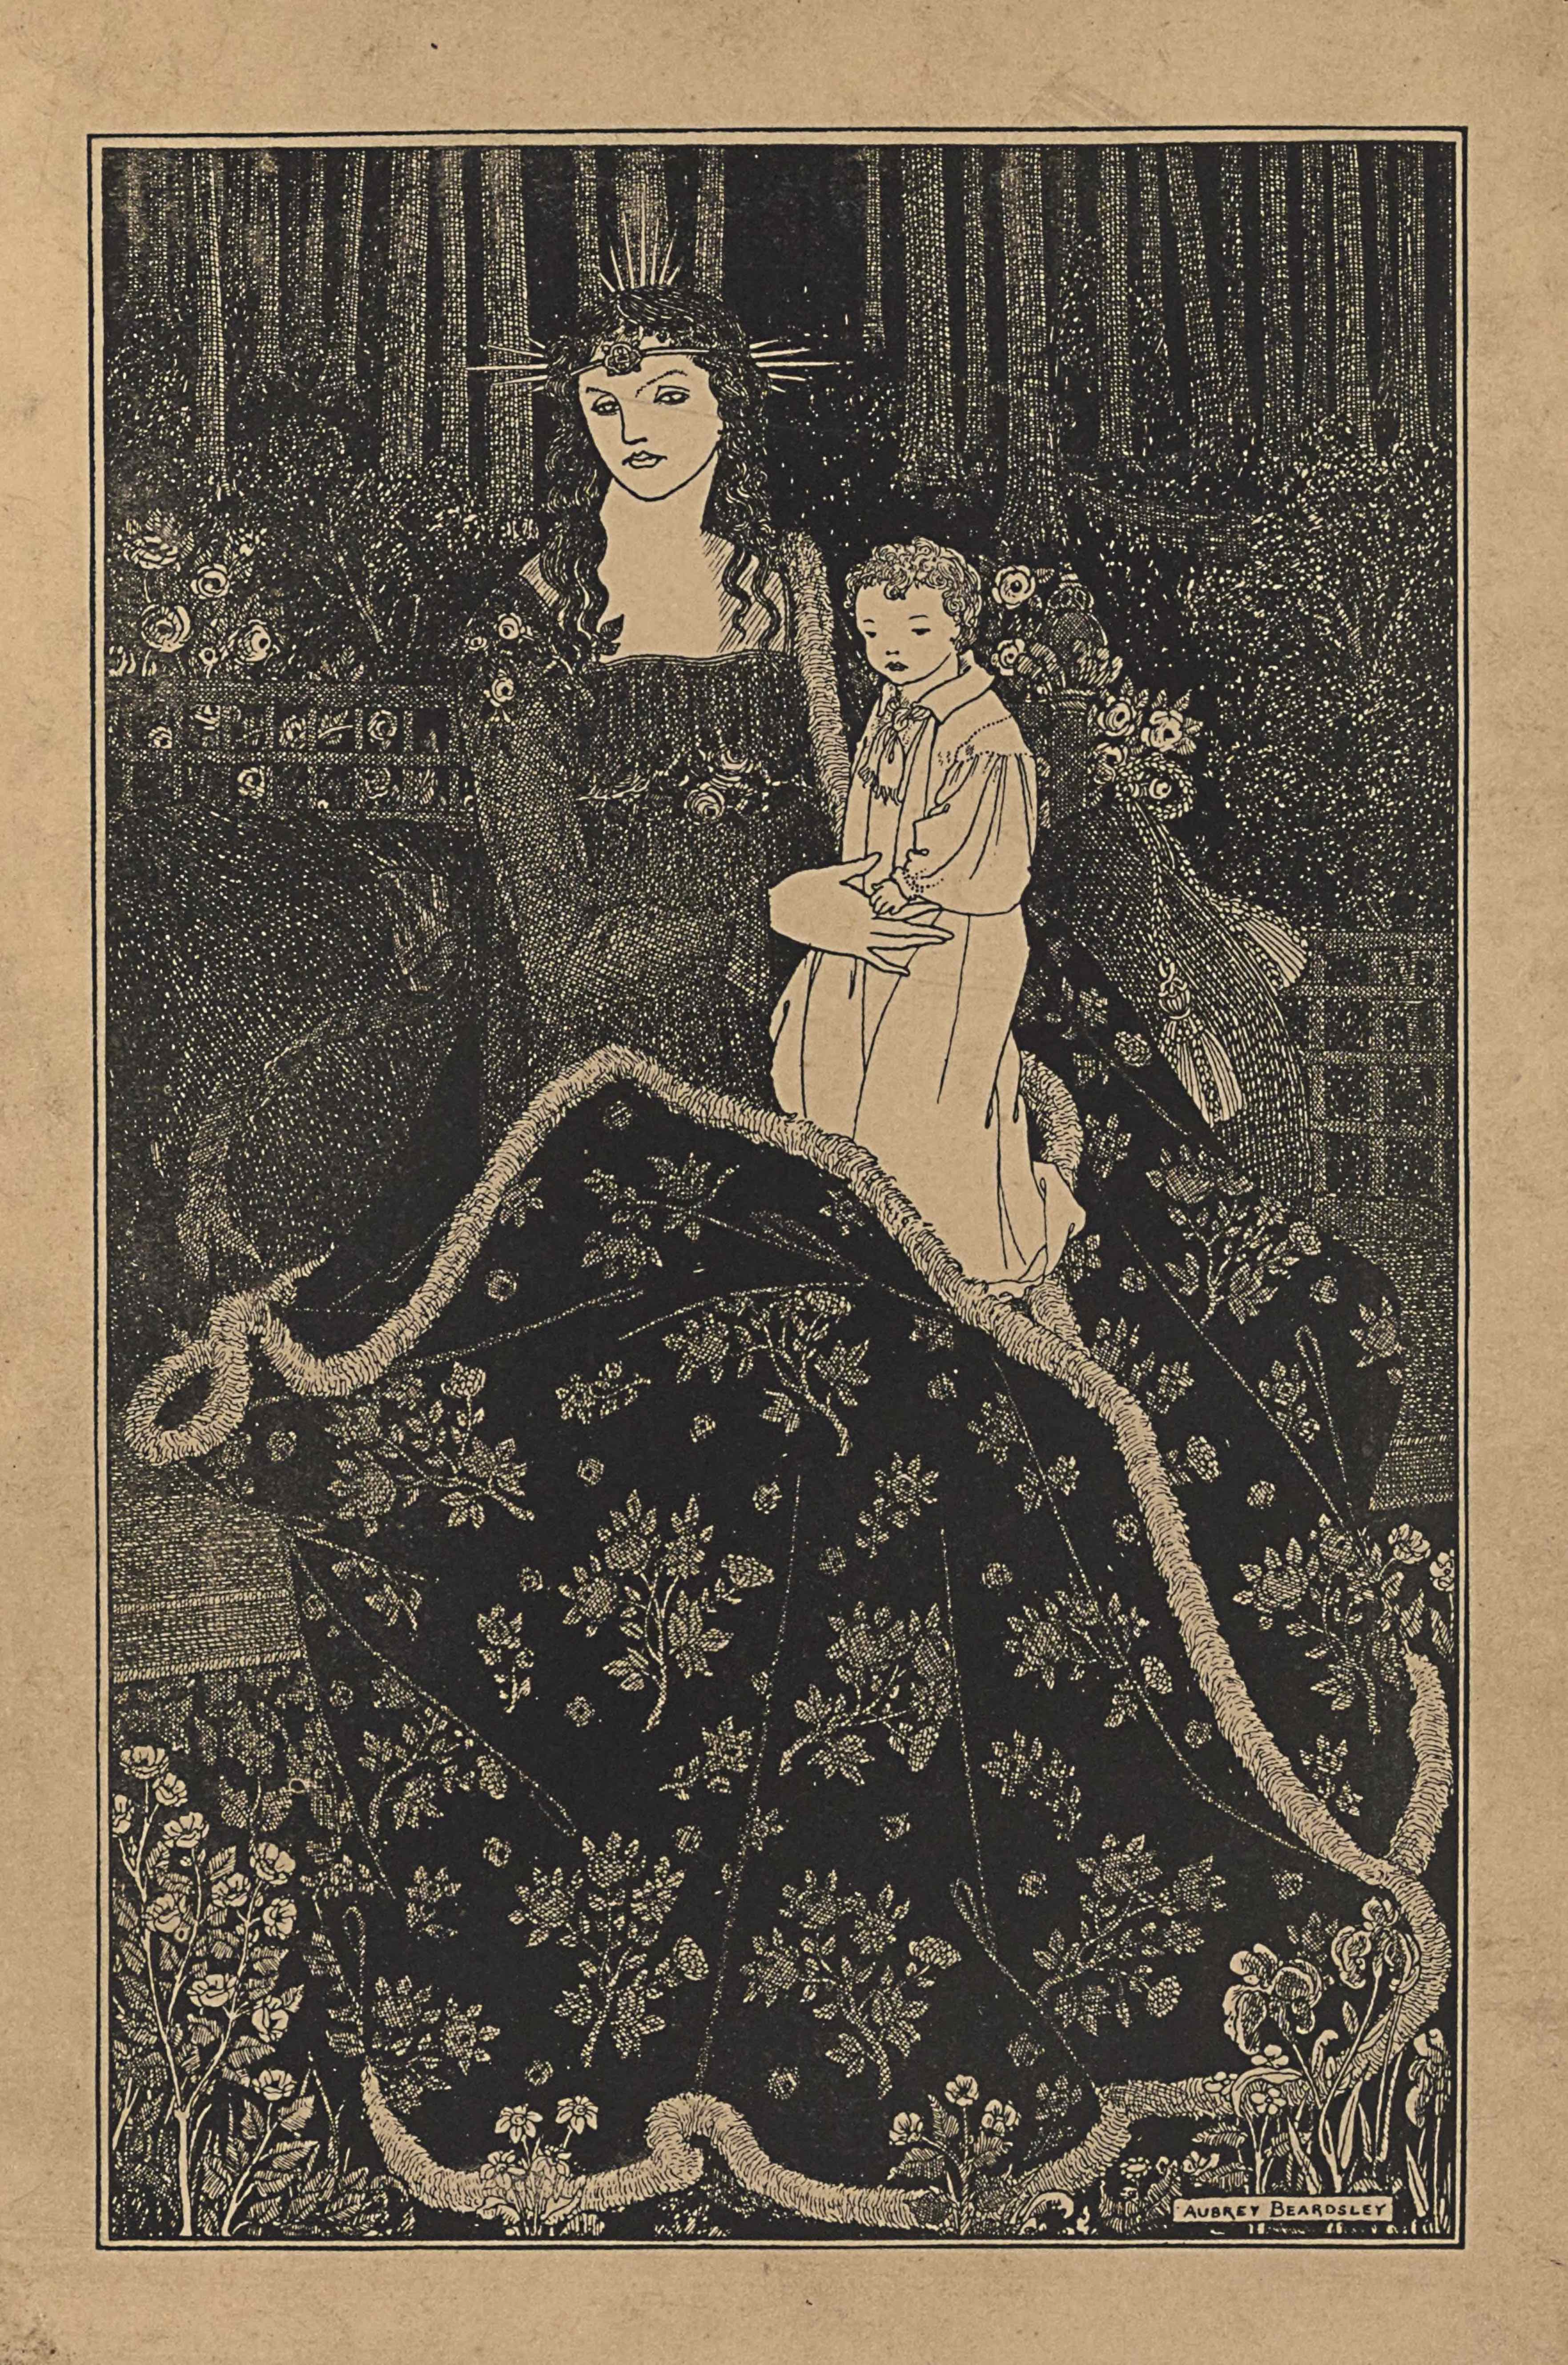 This line-block reproduction of a pen-and-ink drawing is in portrait orientation. The image shows a frontally facing woman sitting on a bench, holding a young child on her lap in a garden before a forest. At the feet of the woman, and in the foreground, are small sproutings of flowers and plants. The bench is placed diagonally at the centre of the picture plane, going up towards the right, The seated woman is wearing a flowing gown with long sleeves and a square neckline. Around her skirt is a large floral patterned blanket or robe that is edged in fur. The woman has her arms bent up to hold the young child on her left knee. She is facing the viewer but turned slightly to the left of the page. She has on a crown with five points sticking up in ascending and then mirrored descending heights protruding from the back of her head. The same set of five points stick out horizontally from both sides of her head as well. Her hair falls past her shoulders in dark waves. On her forehead a band wraps horizontally around with a small ornamented disk at the front and centre. The young child on her lap is wearing a light coloured and collared robe with a small necktie loosely tied. The child faces to the left of the page and shows about a three-quarters profile. The child has short curly hair. Behind the child and to the right is a sack that is tied off with a tassel rope. To the right of the sack in the background is a piece of lattice. To the left of the child and woman is another piece of the lattice further back in the forest than the other. In front of the lattice on the left is a dark area with a bush of roses blooming. Trees fill the background across the top third of the page and only their trunks are visible within the frame. There is black darkness between the trunks in the background. The name “AUBREY BEARDSLEY” [caps] appears in the bottom right corner, framed within a single-lined border.